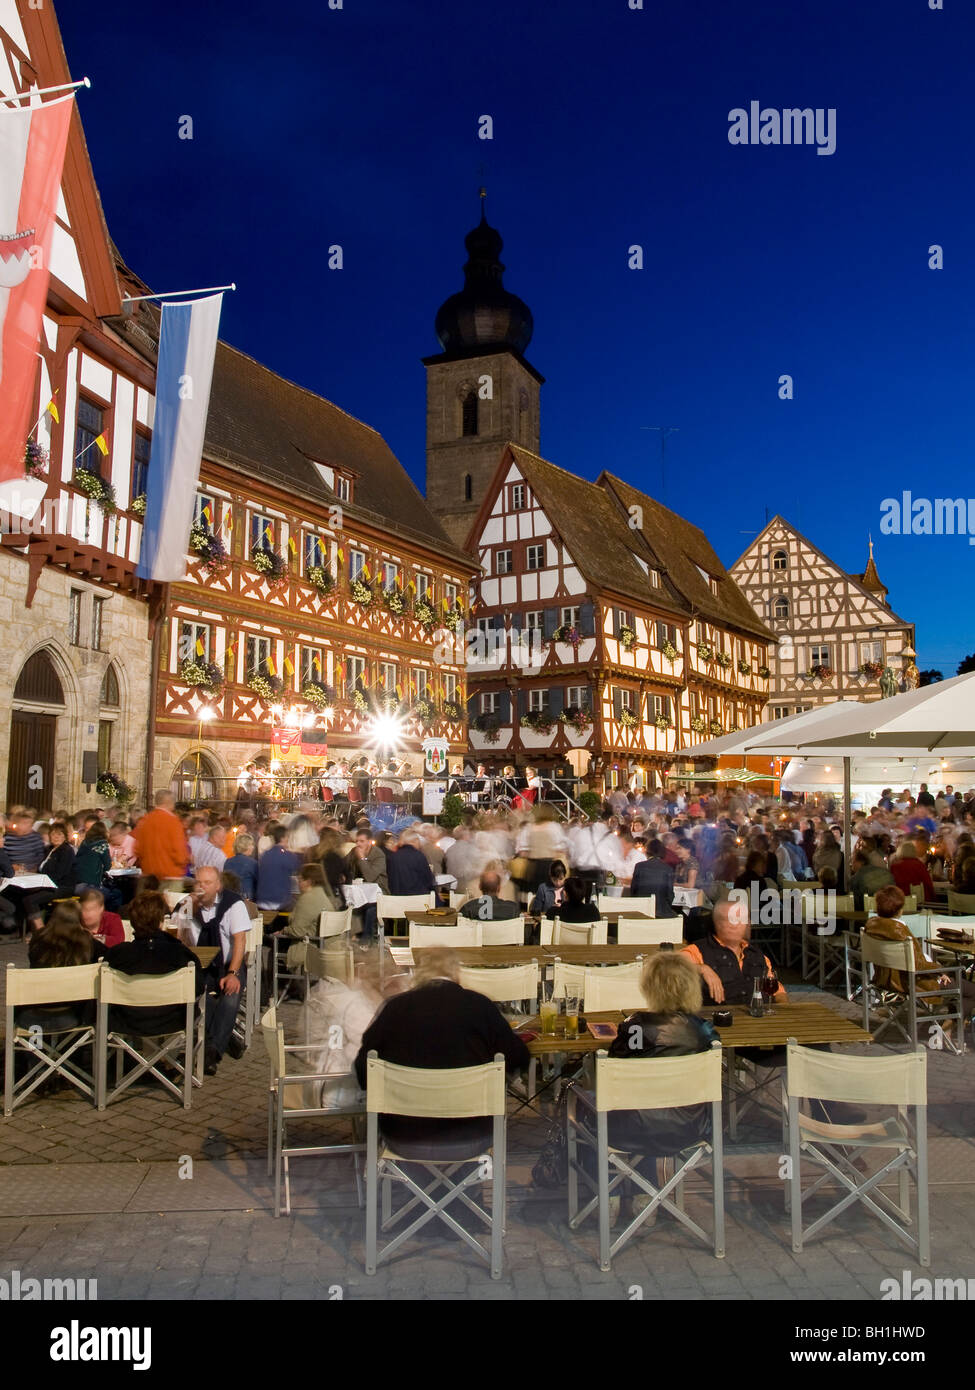 Festival in the old part of town, Forchheim, Franconia, Germany Stock Photo